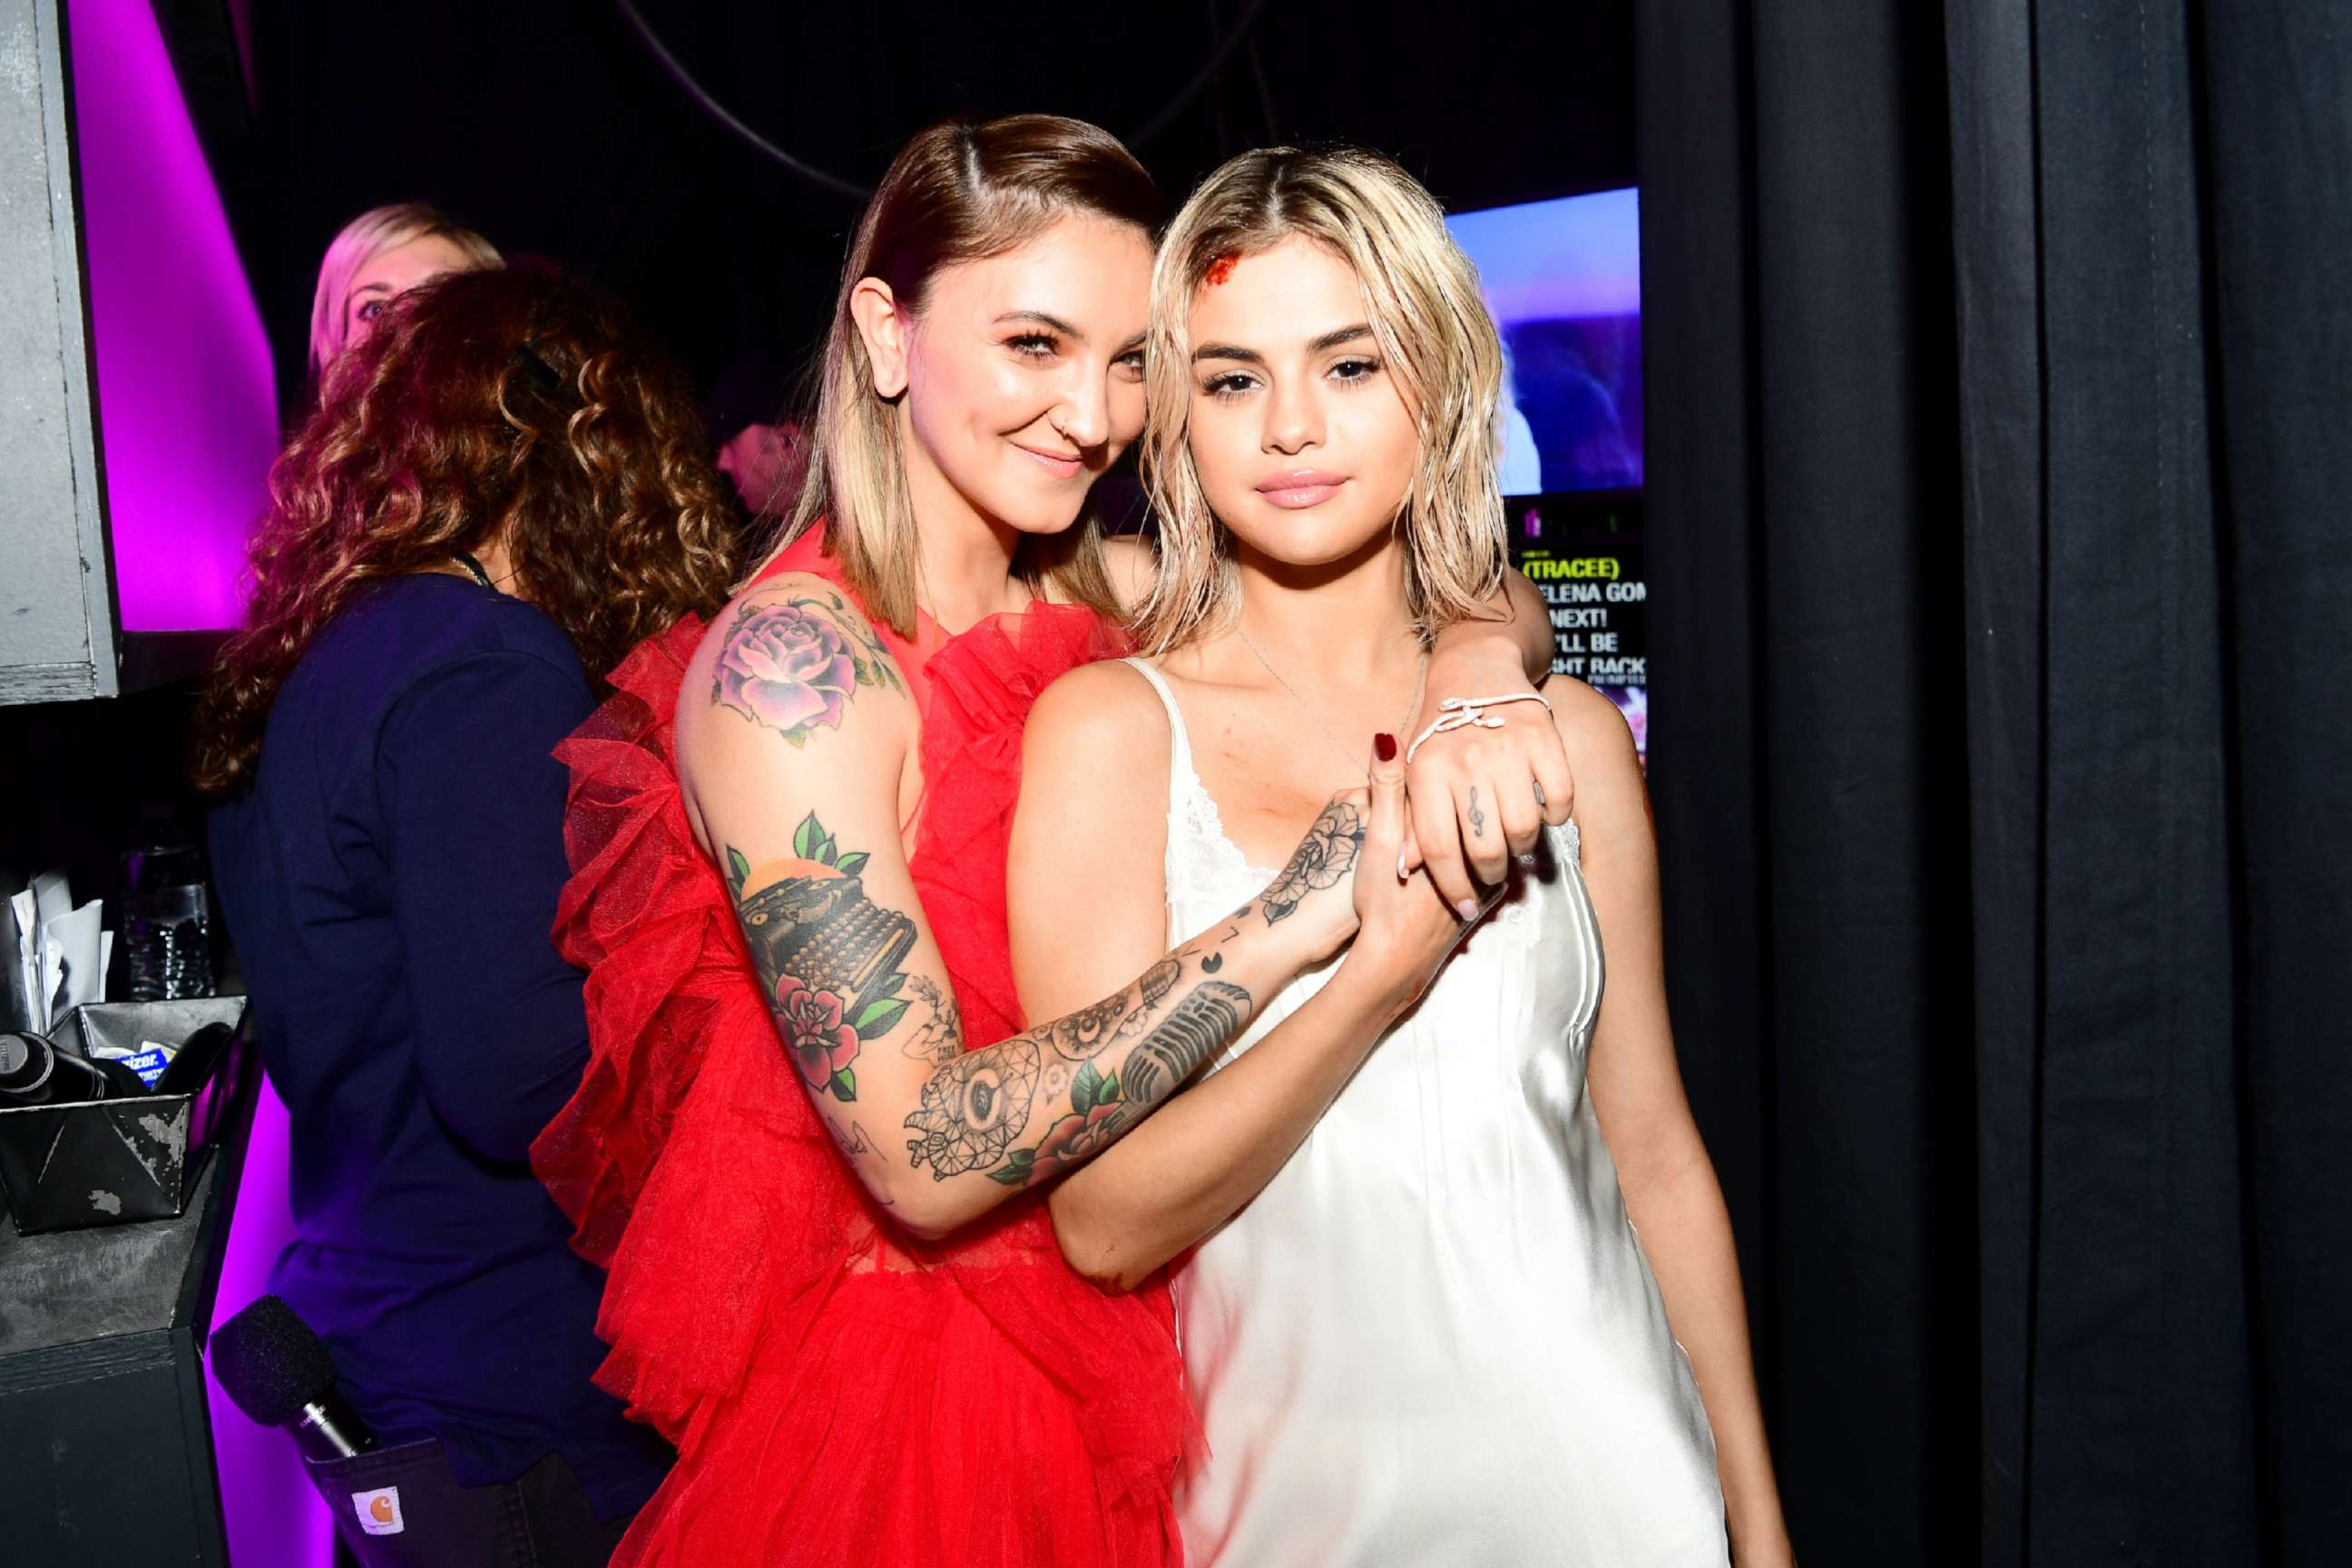 PHOTO: Julia Michaels, left, and Selena Gomez pose backstage during an event in Los Angeles, Nov. 19, 2017.